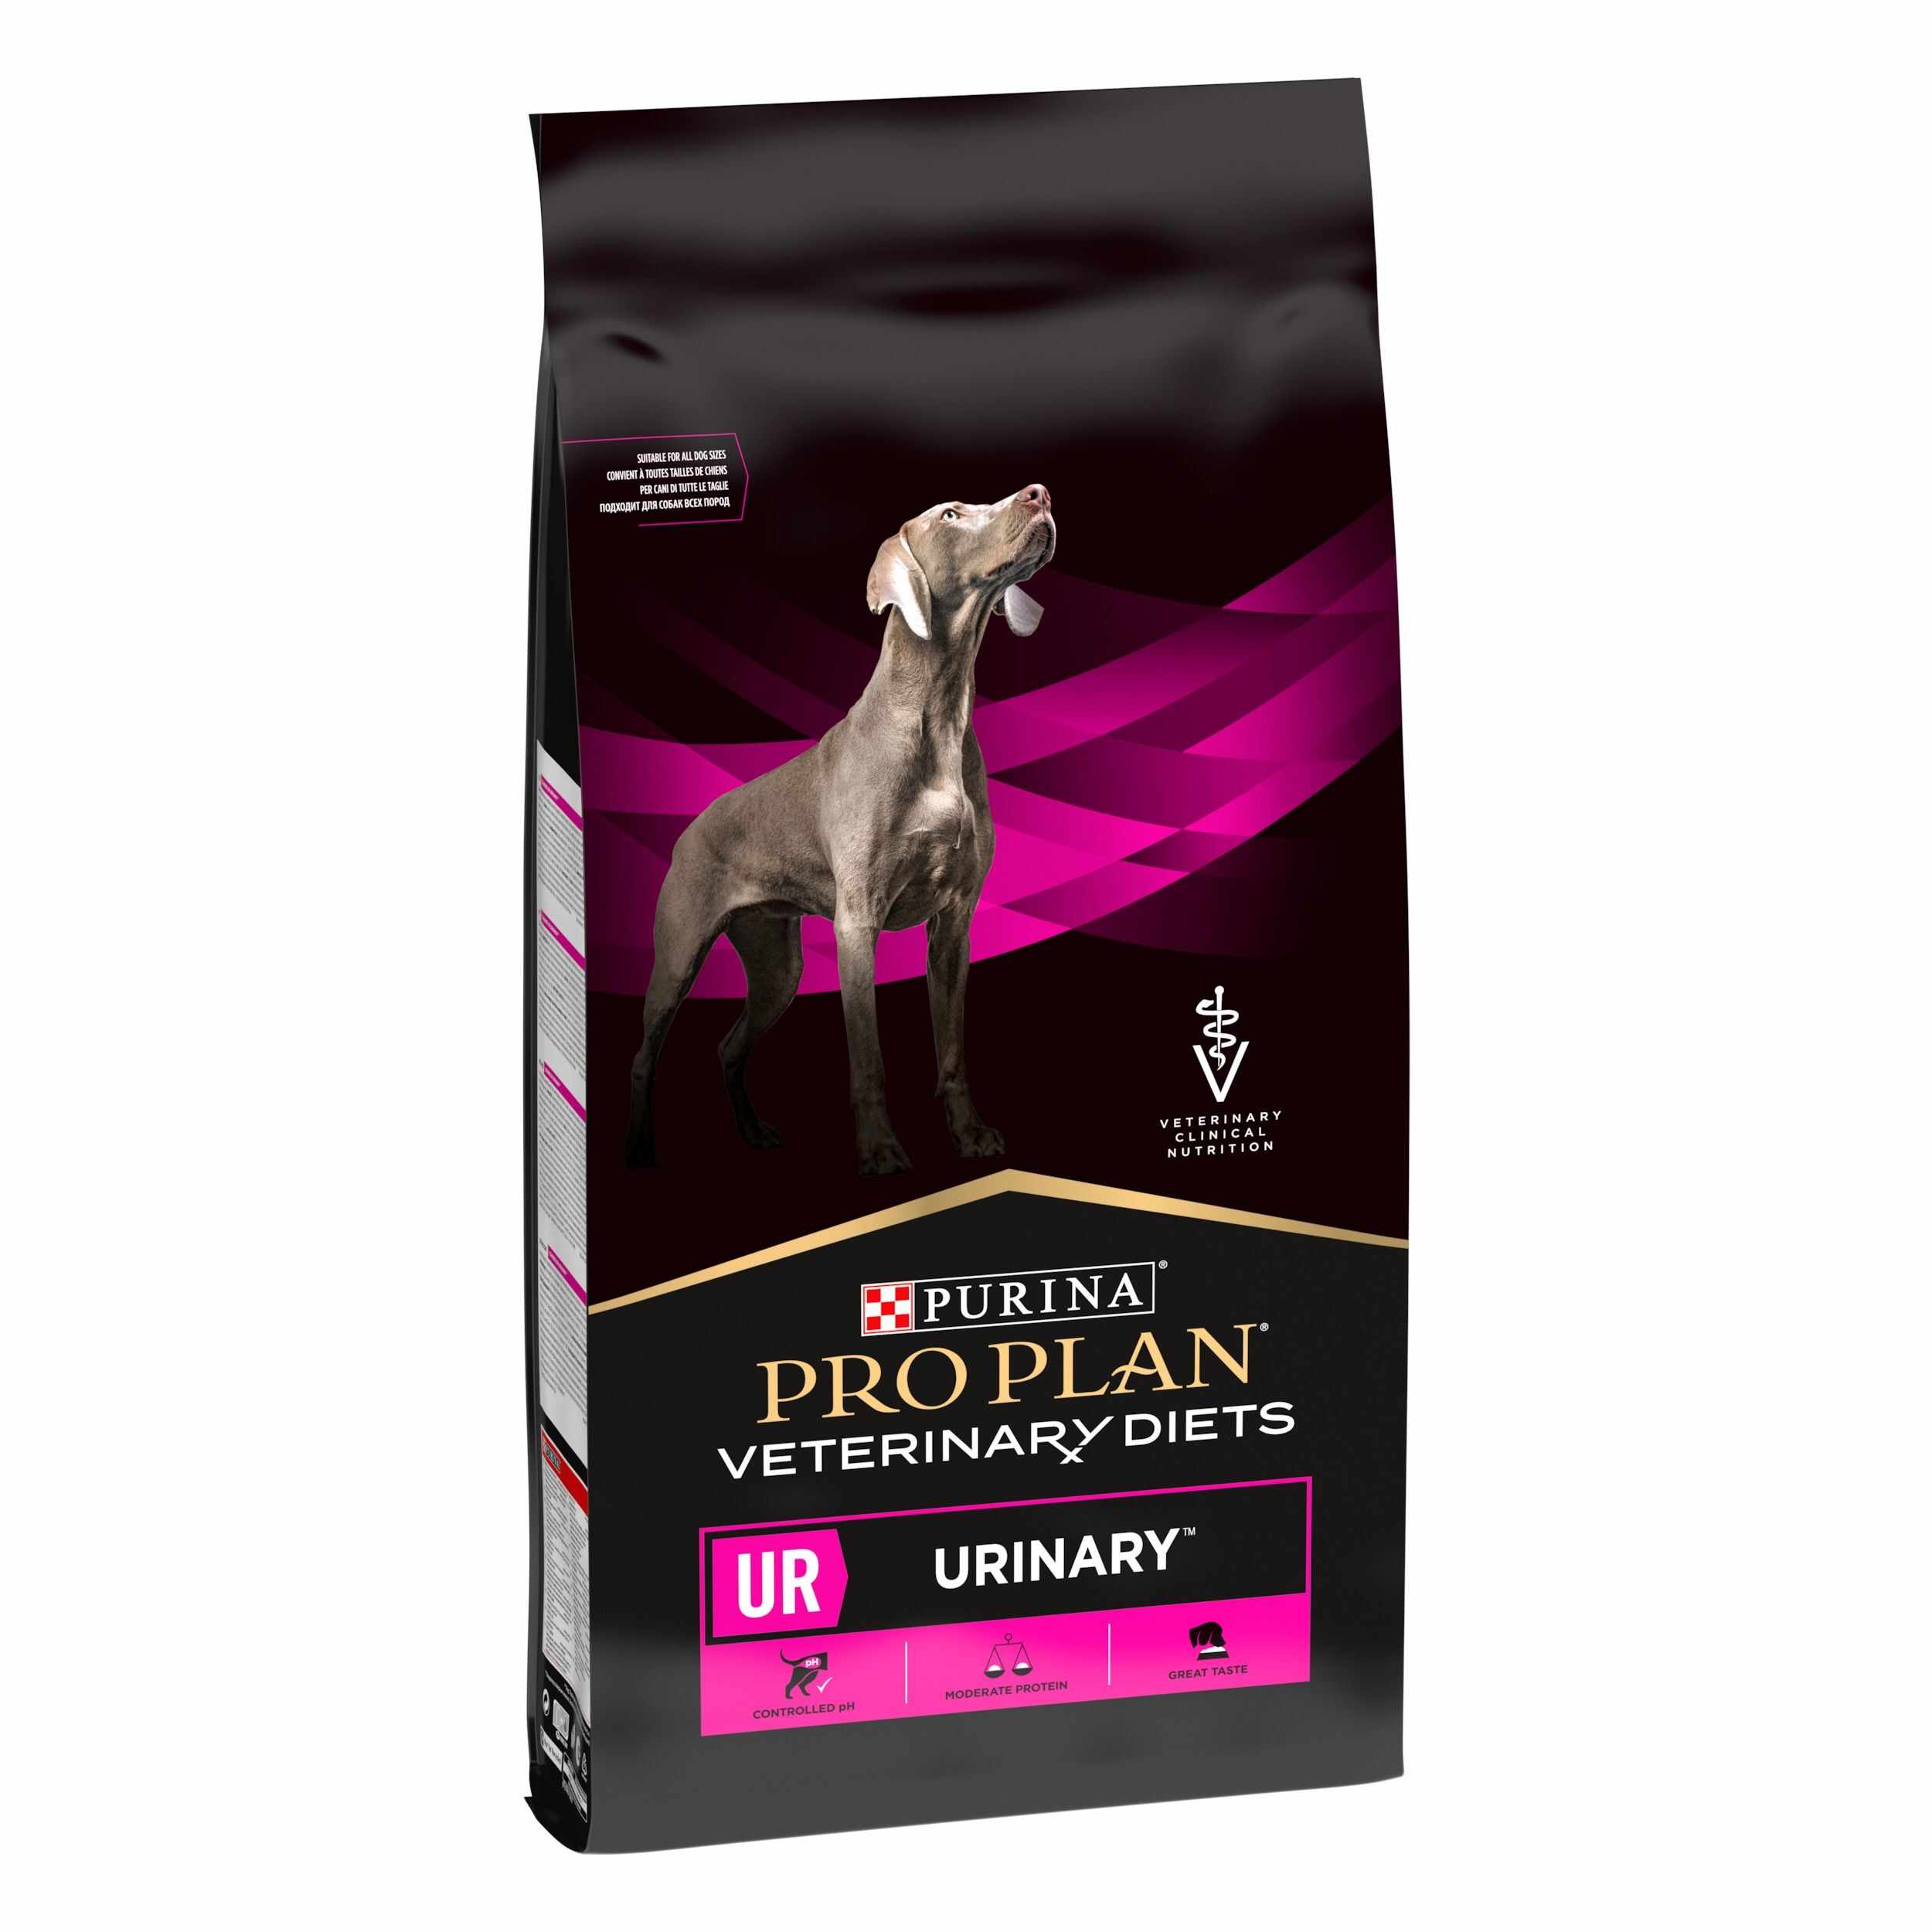 Purina Veterinary Diets Canine UR, Urinary, 12 kg